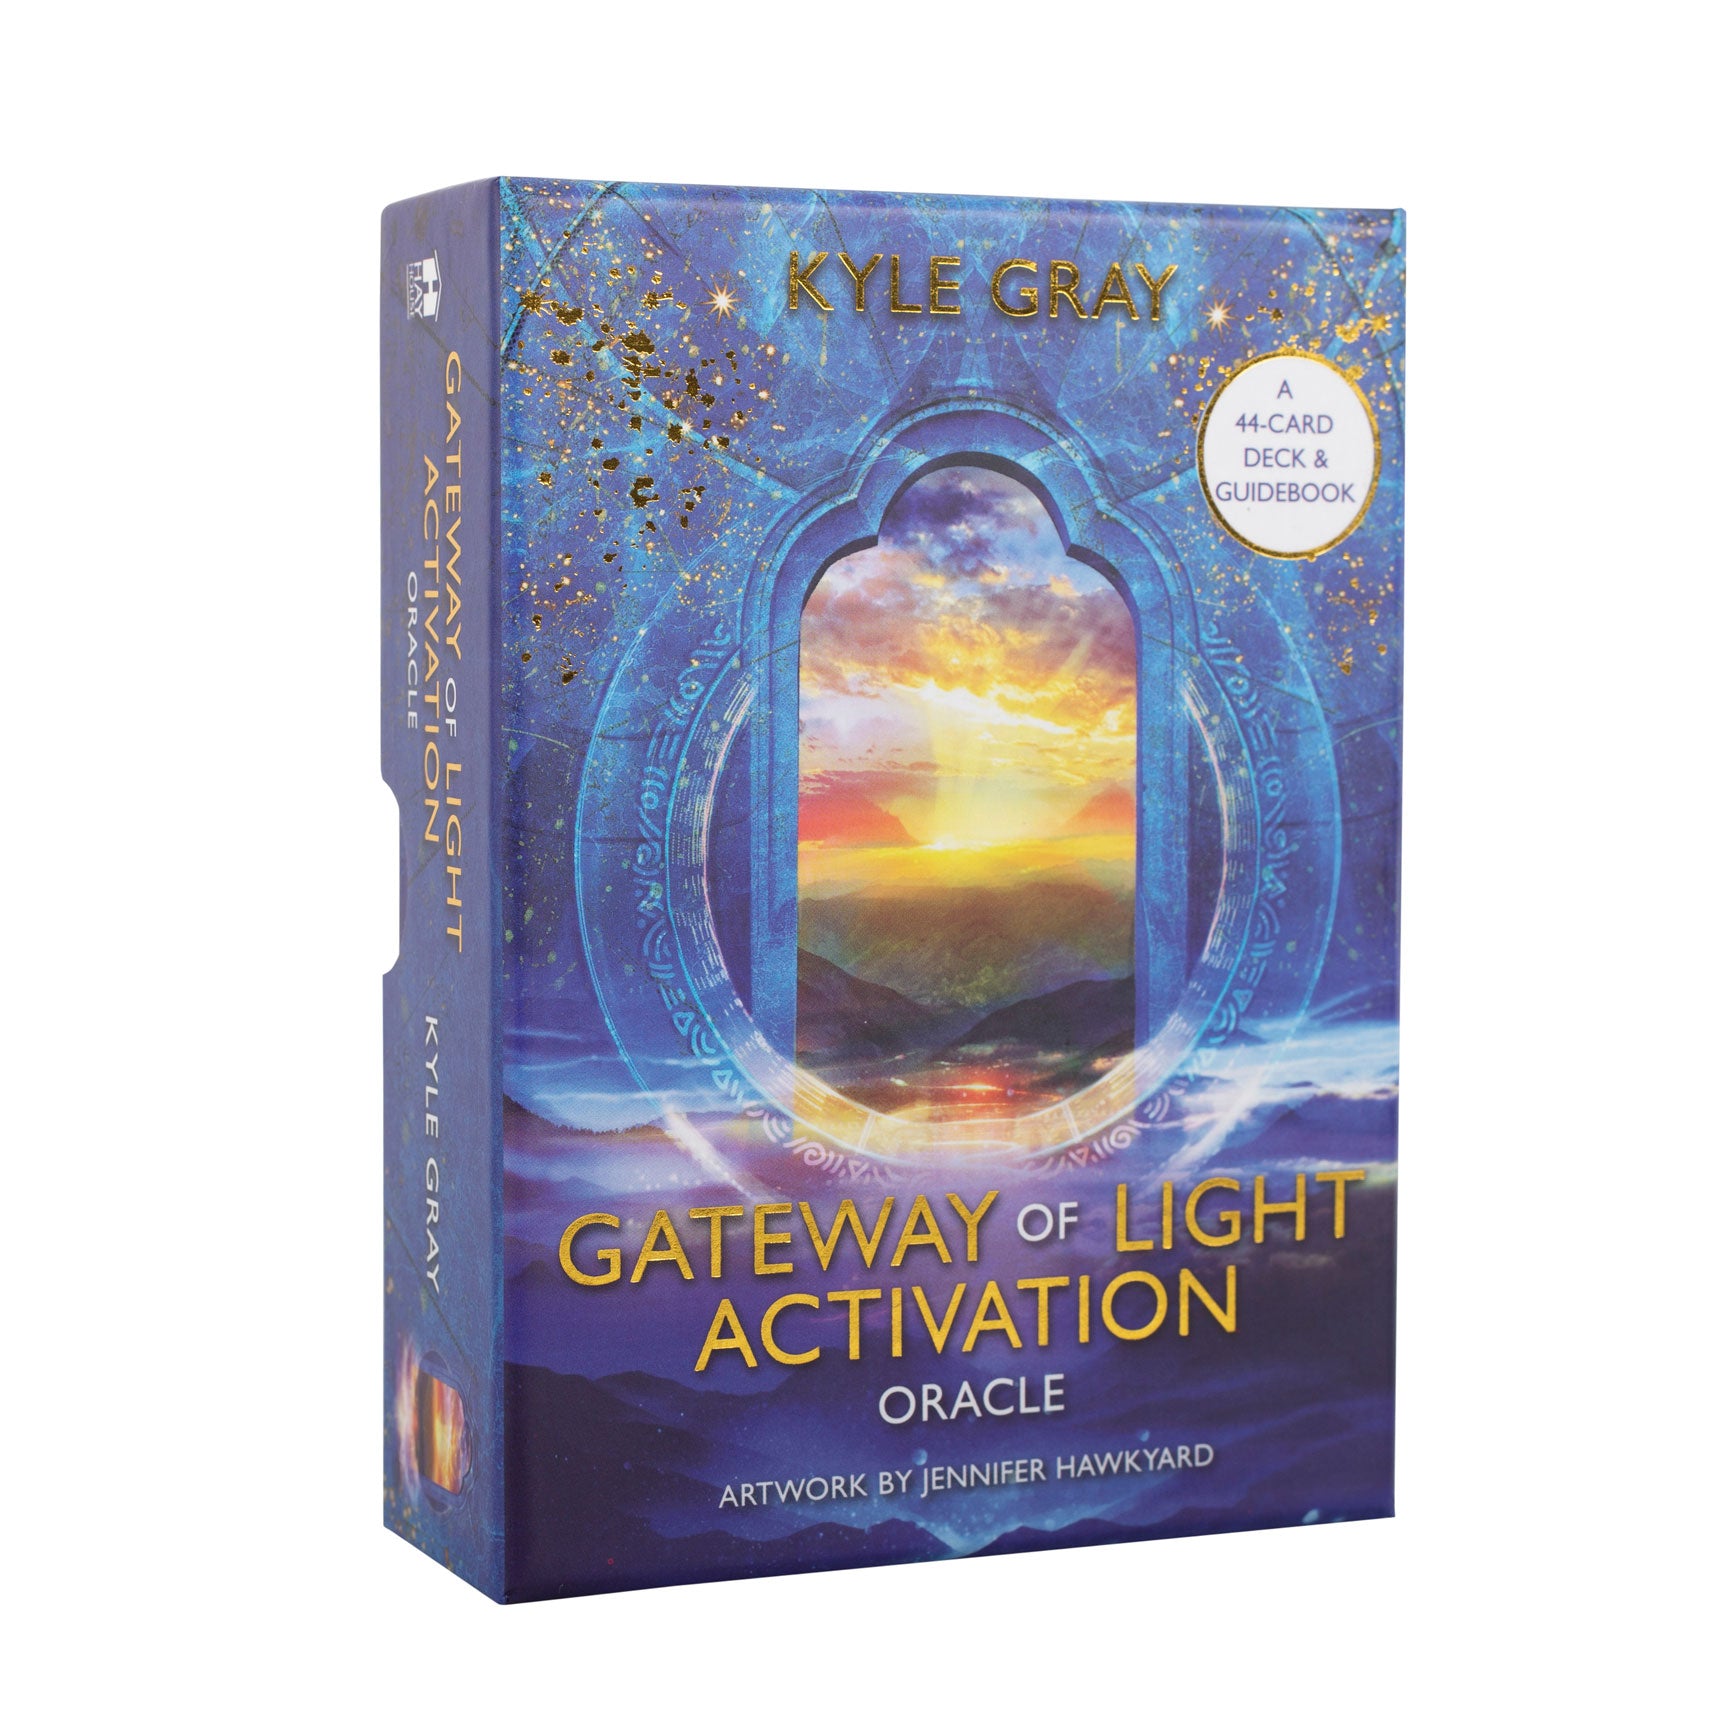 View Gateway of Light Activation Oracle Cards information